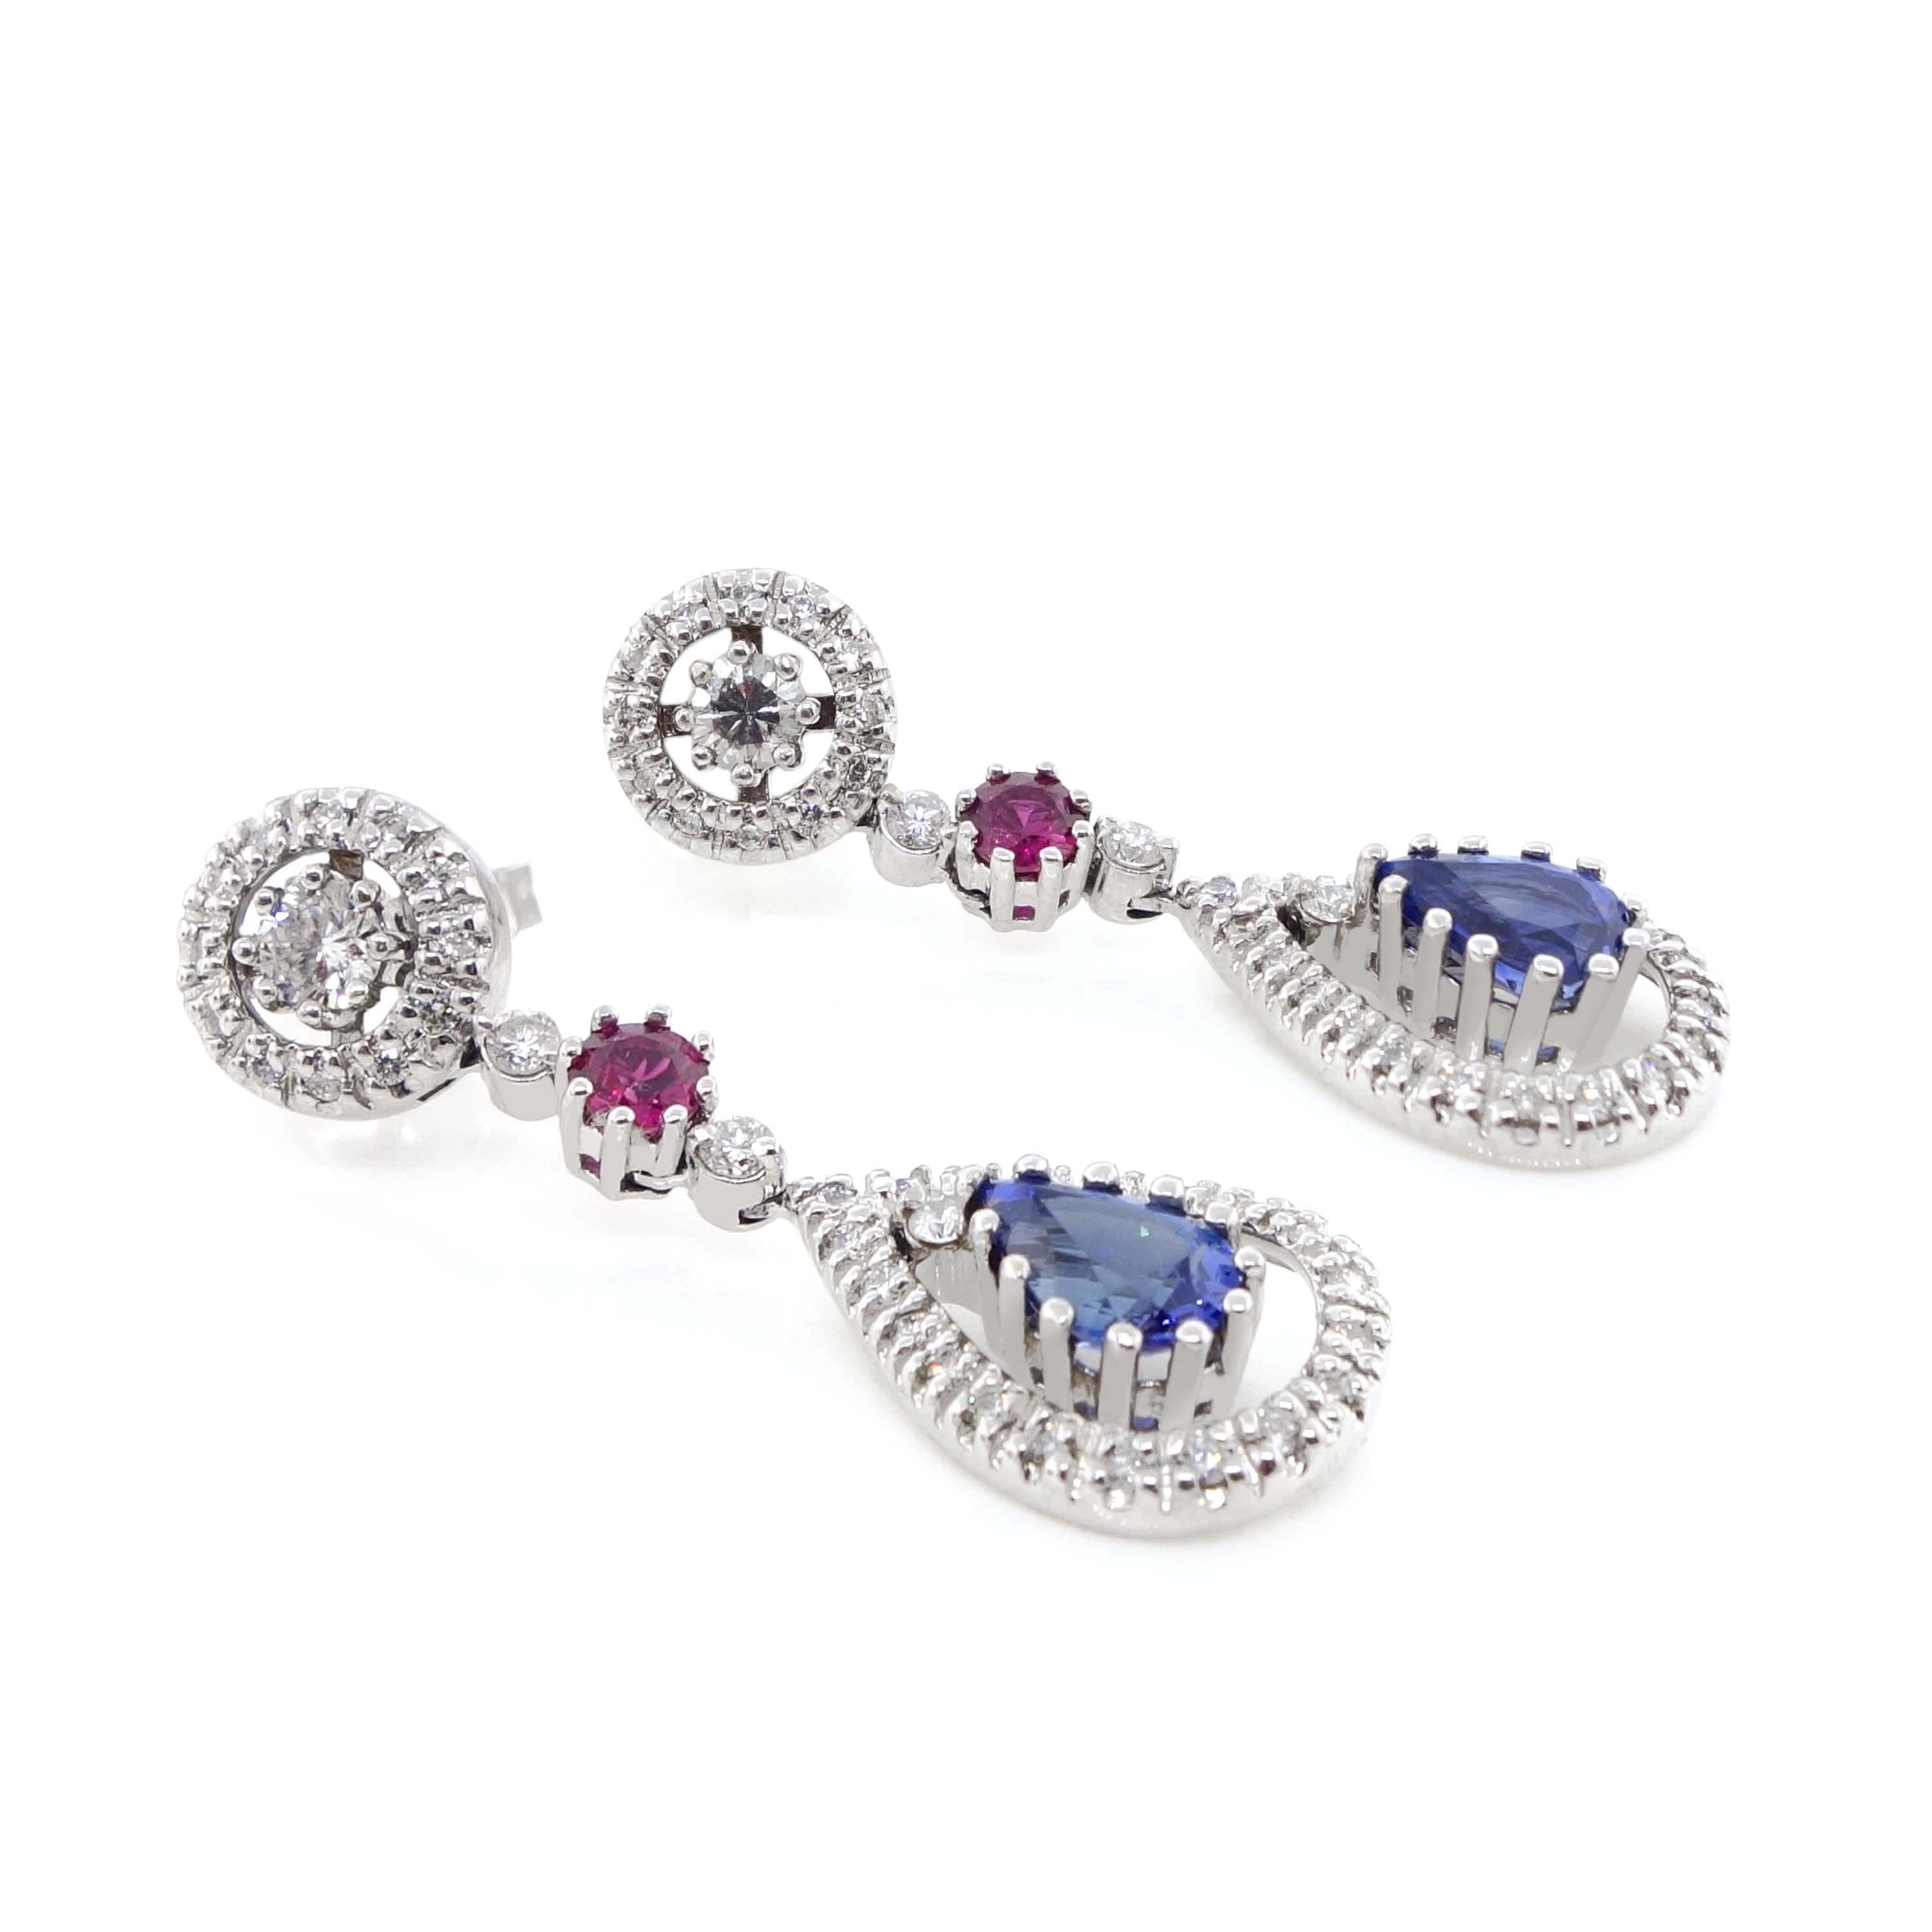 Diamond Earrings containing 2 fine blue pear shape sapphires of about 2.06 carats, 2 round rubies of about 0.45 carats, 72 round brilliant cut diamonds of about 1.06 carats with a clarity of SI and color G. All stones are set in 14k white gold. The